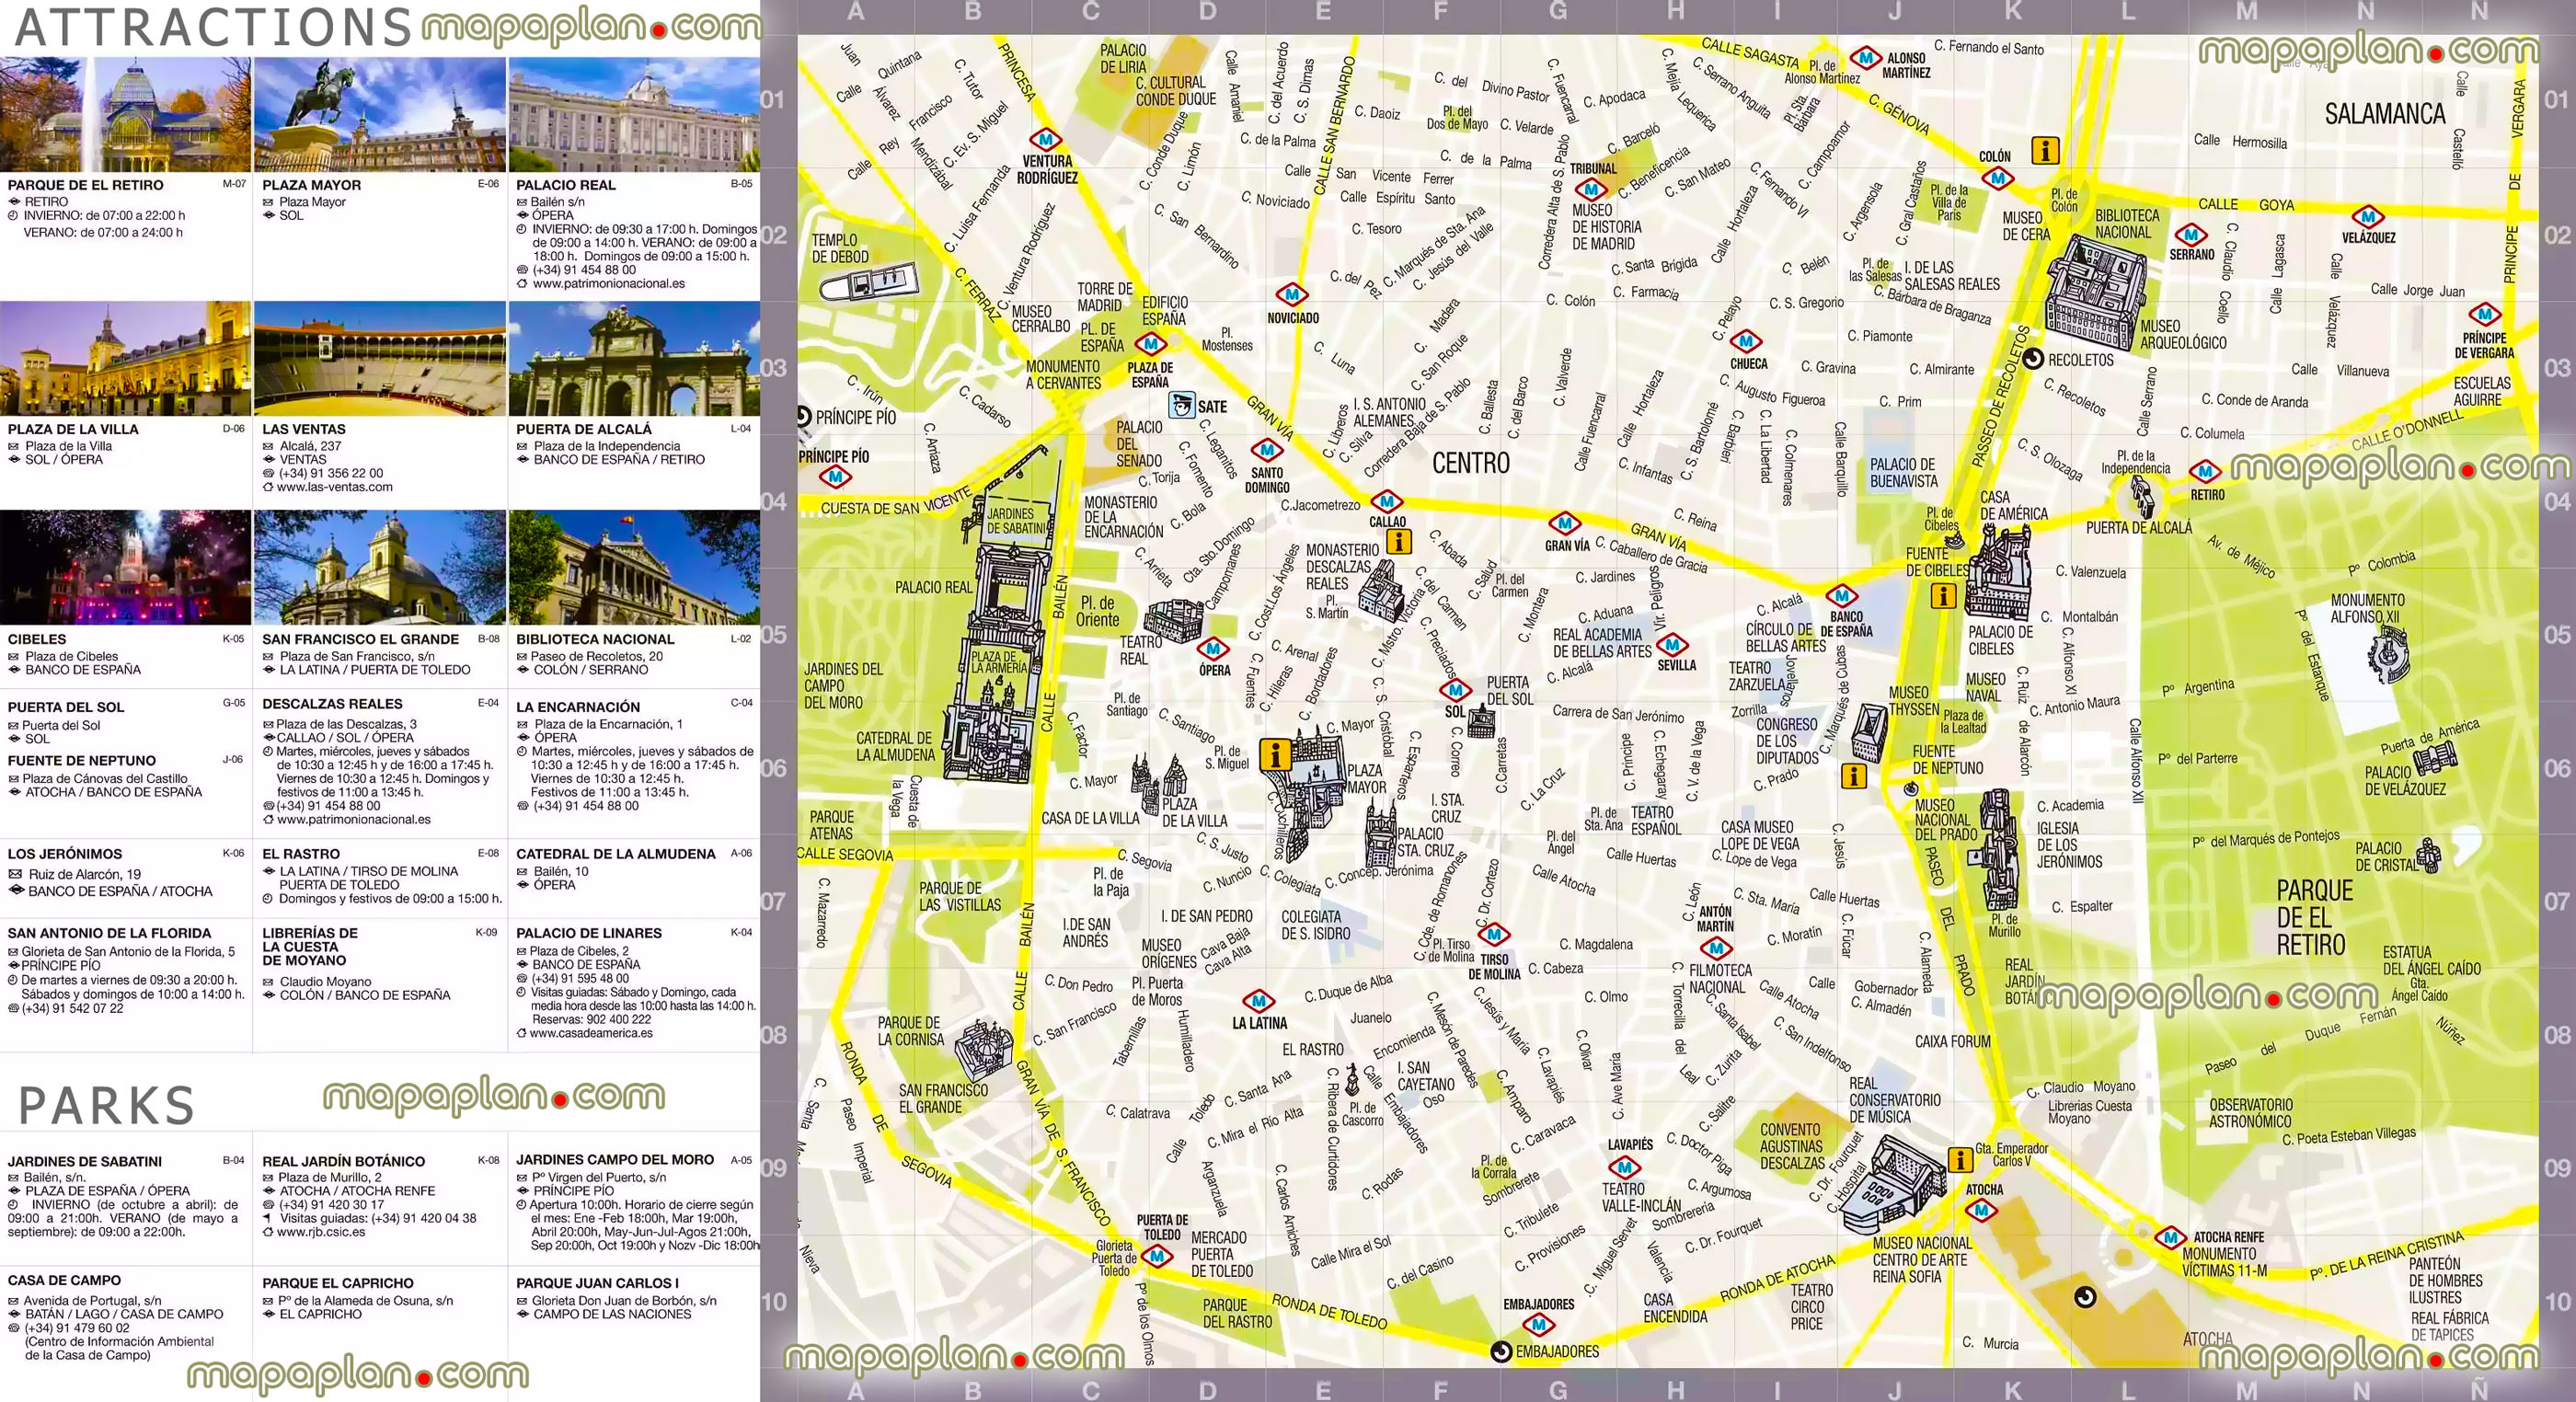 printable walking favourite attractions parks points interest visit tourists old town city centre great spanish historic spots best must see sightss Madrid Top tourist attractions map